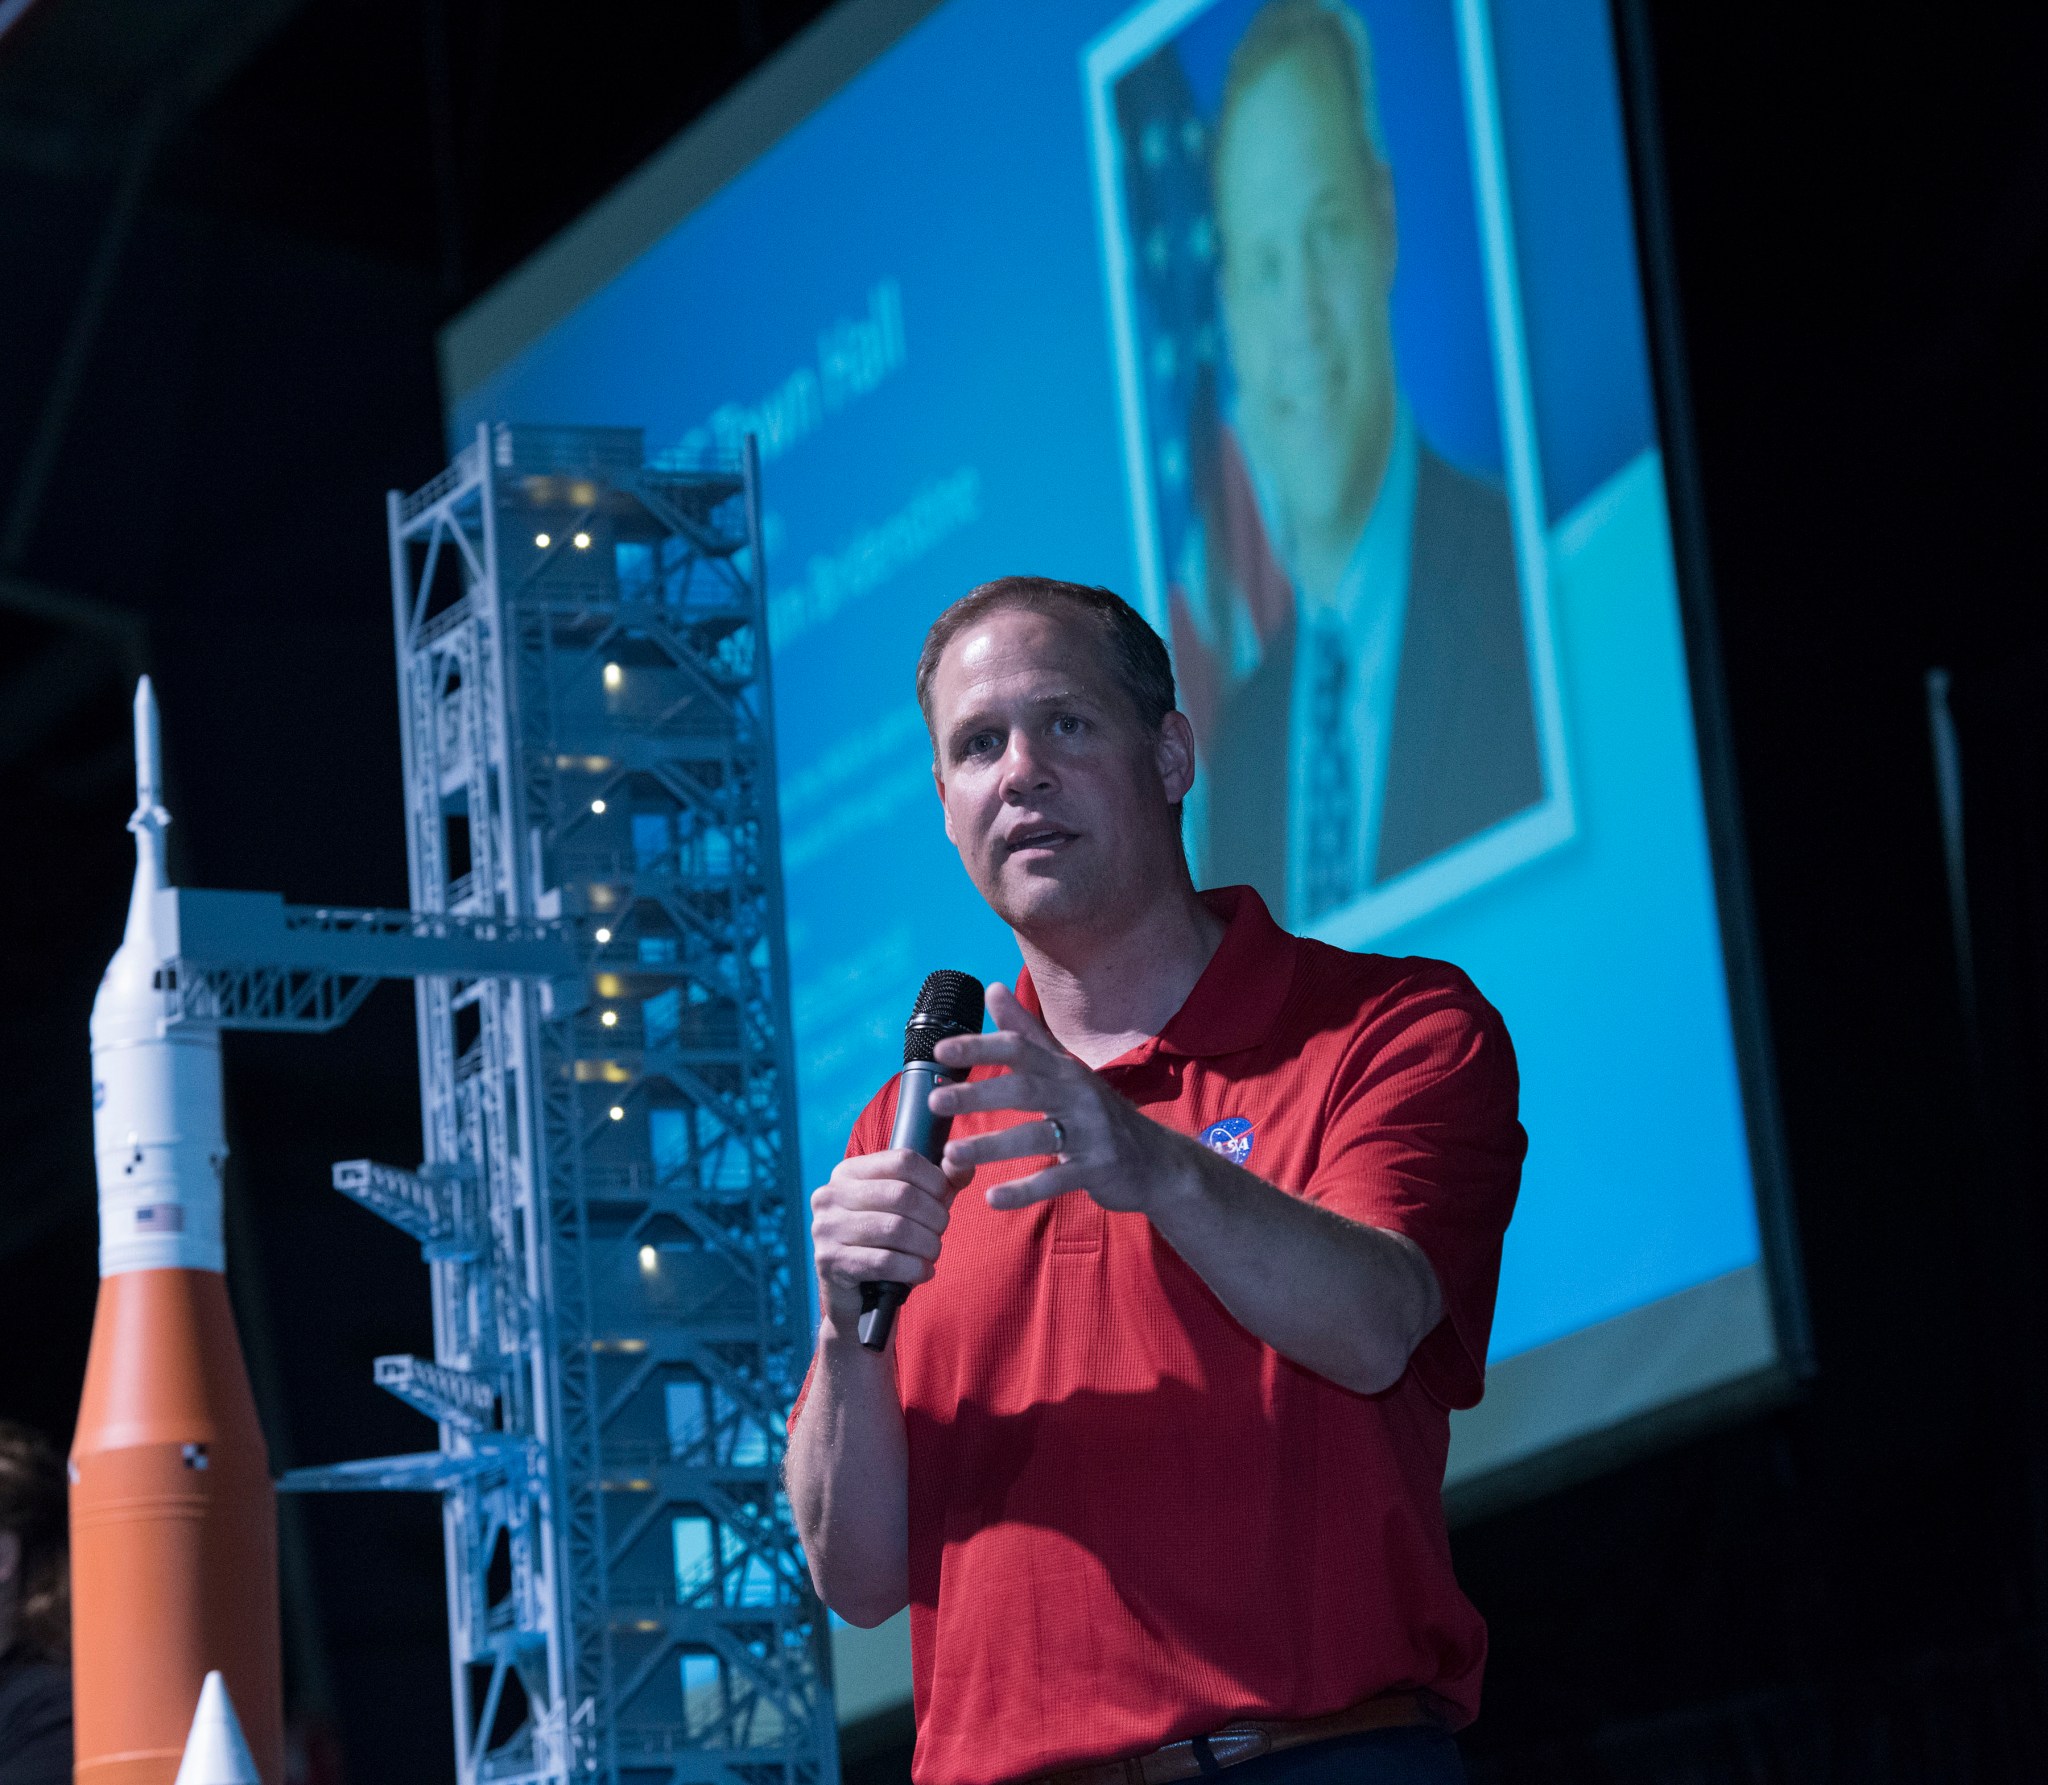 NASA Administrator Jim Bridenstine addresses the Marshall workforce before taking questions at a town hall meeting.